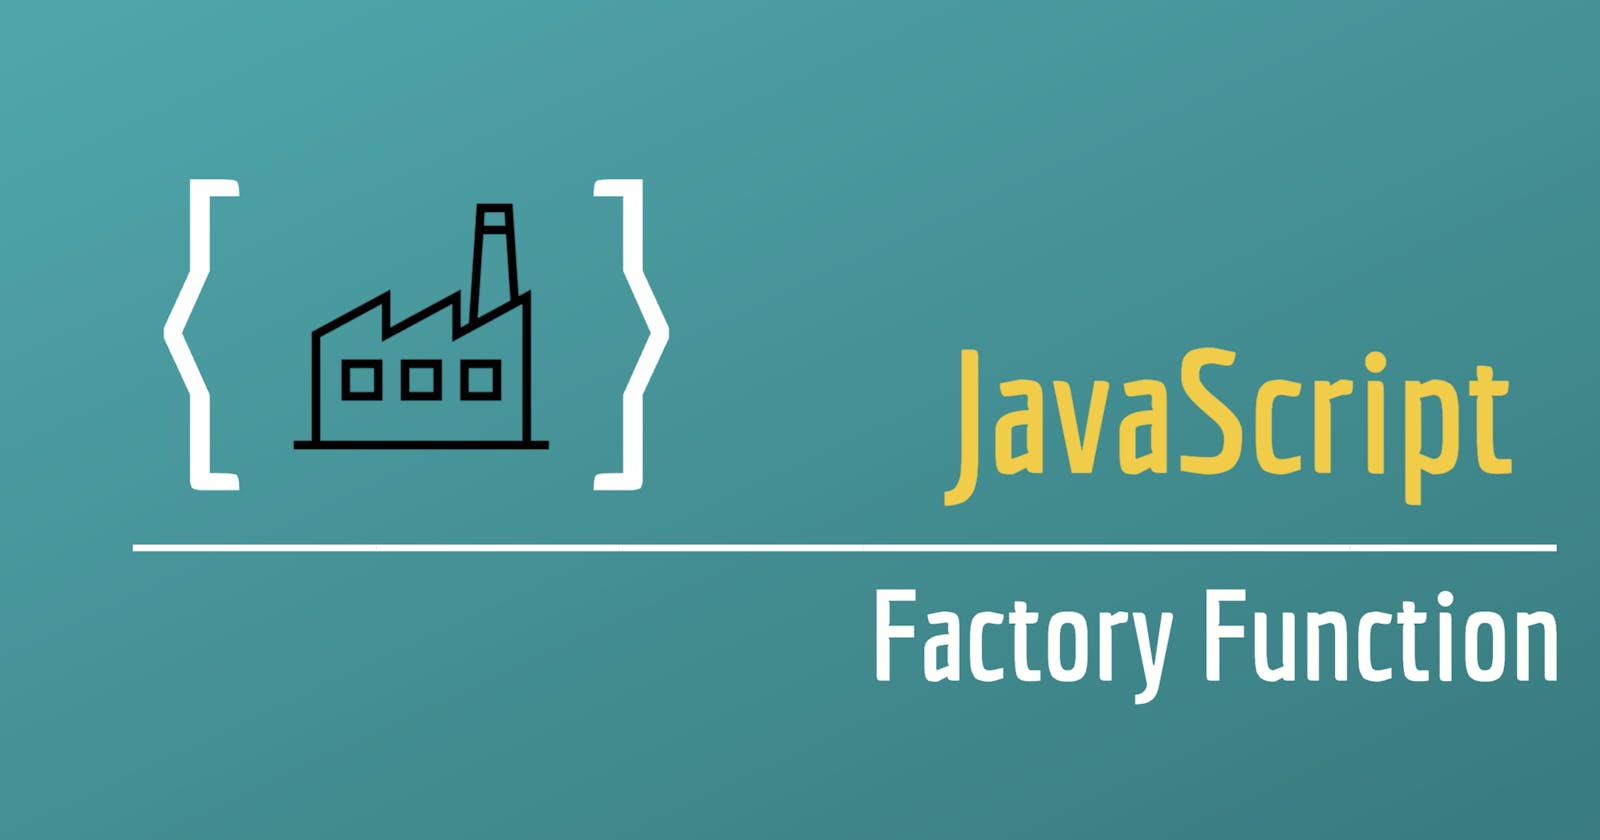 Introduction to Javascript's Factory Function